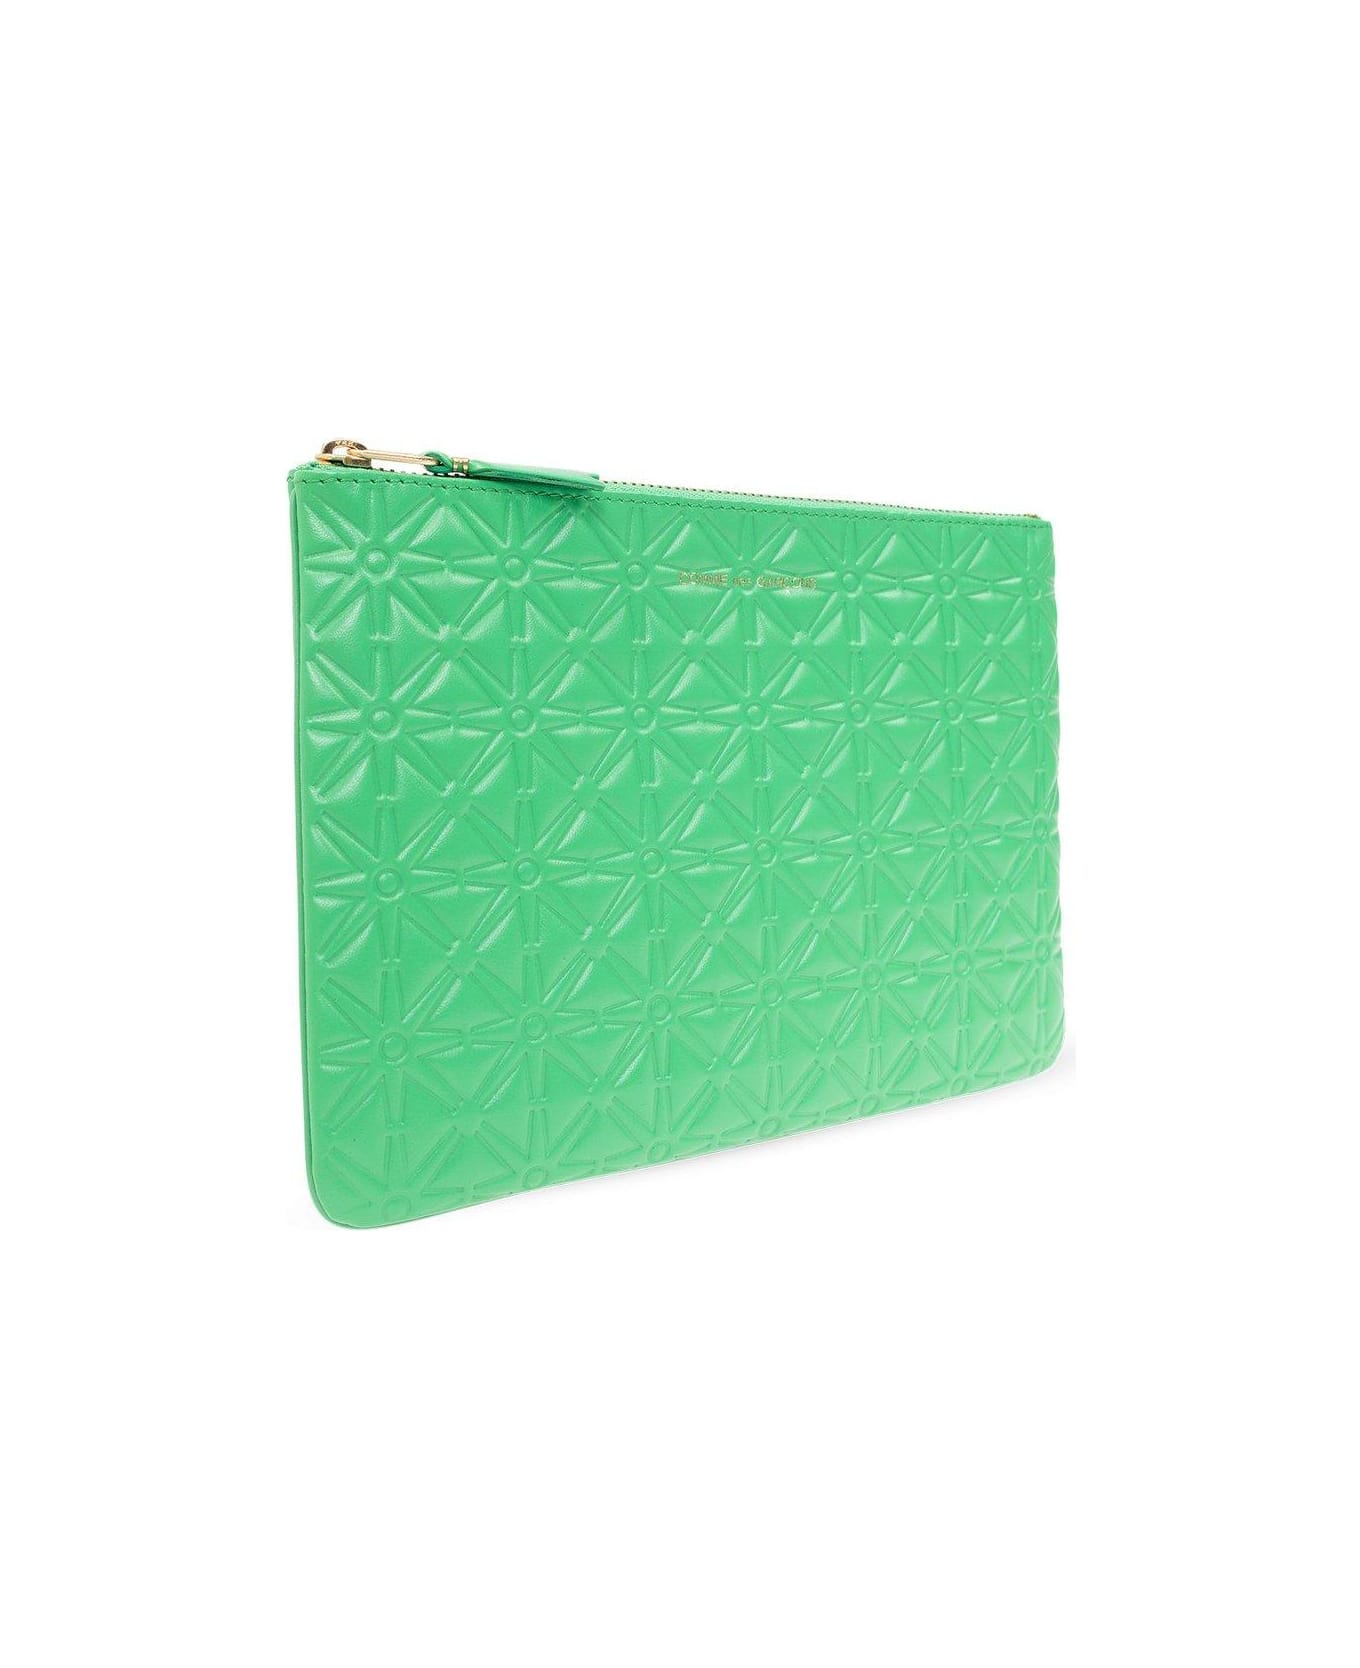 Comme des Garçons Wallet Embossed Zipped Pouch - Gree Green バッグ